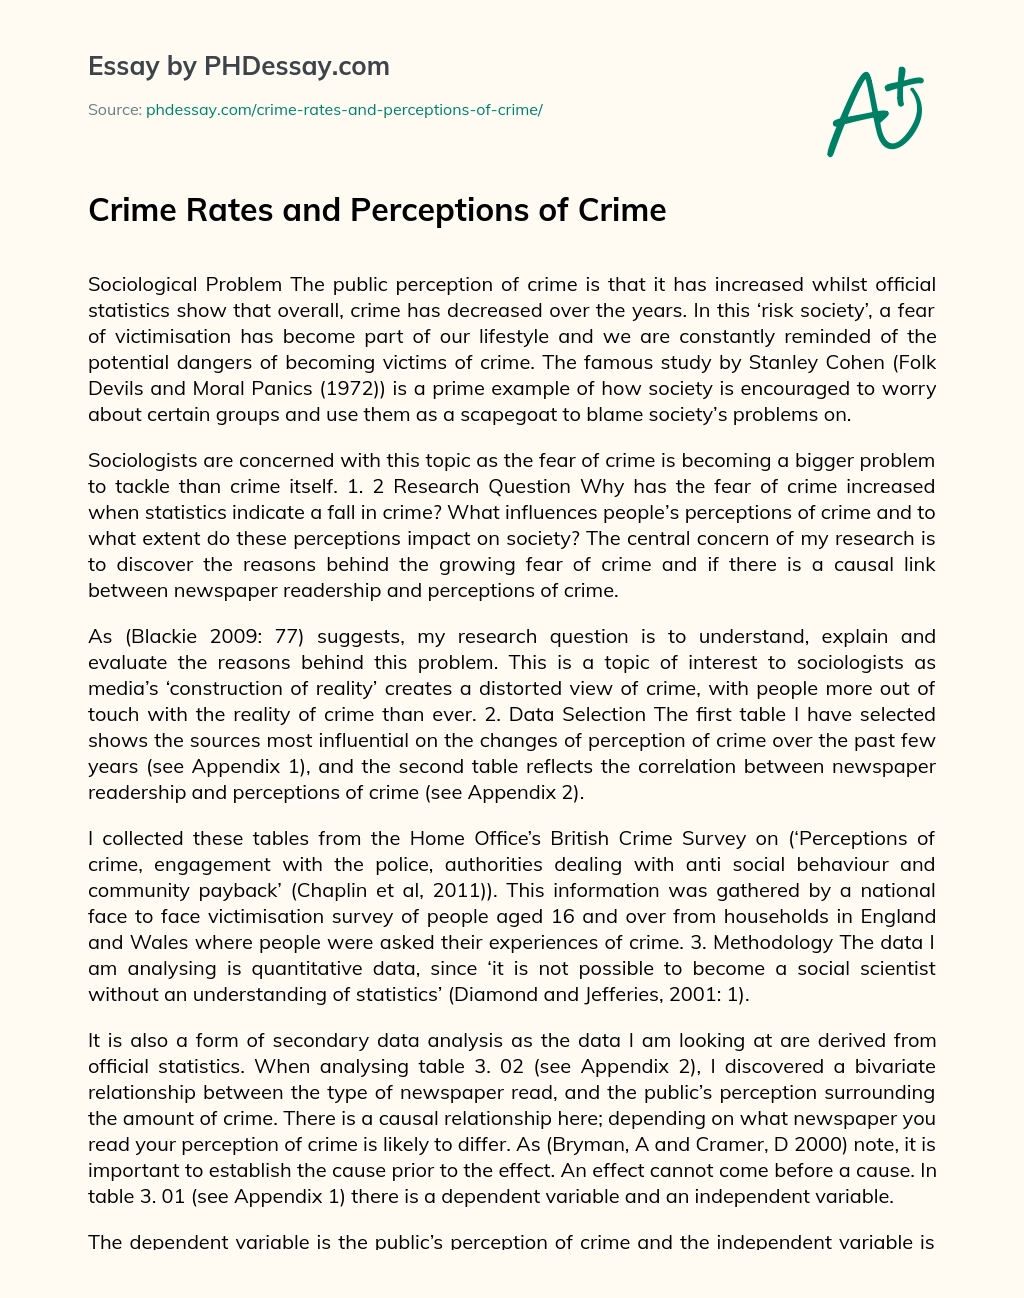 Crime Rates and Perceptions of Crime essay